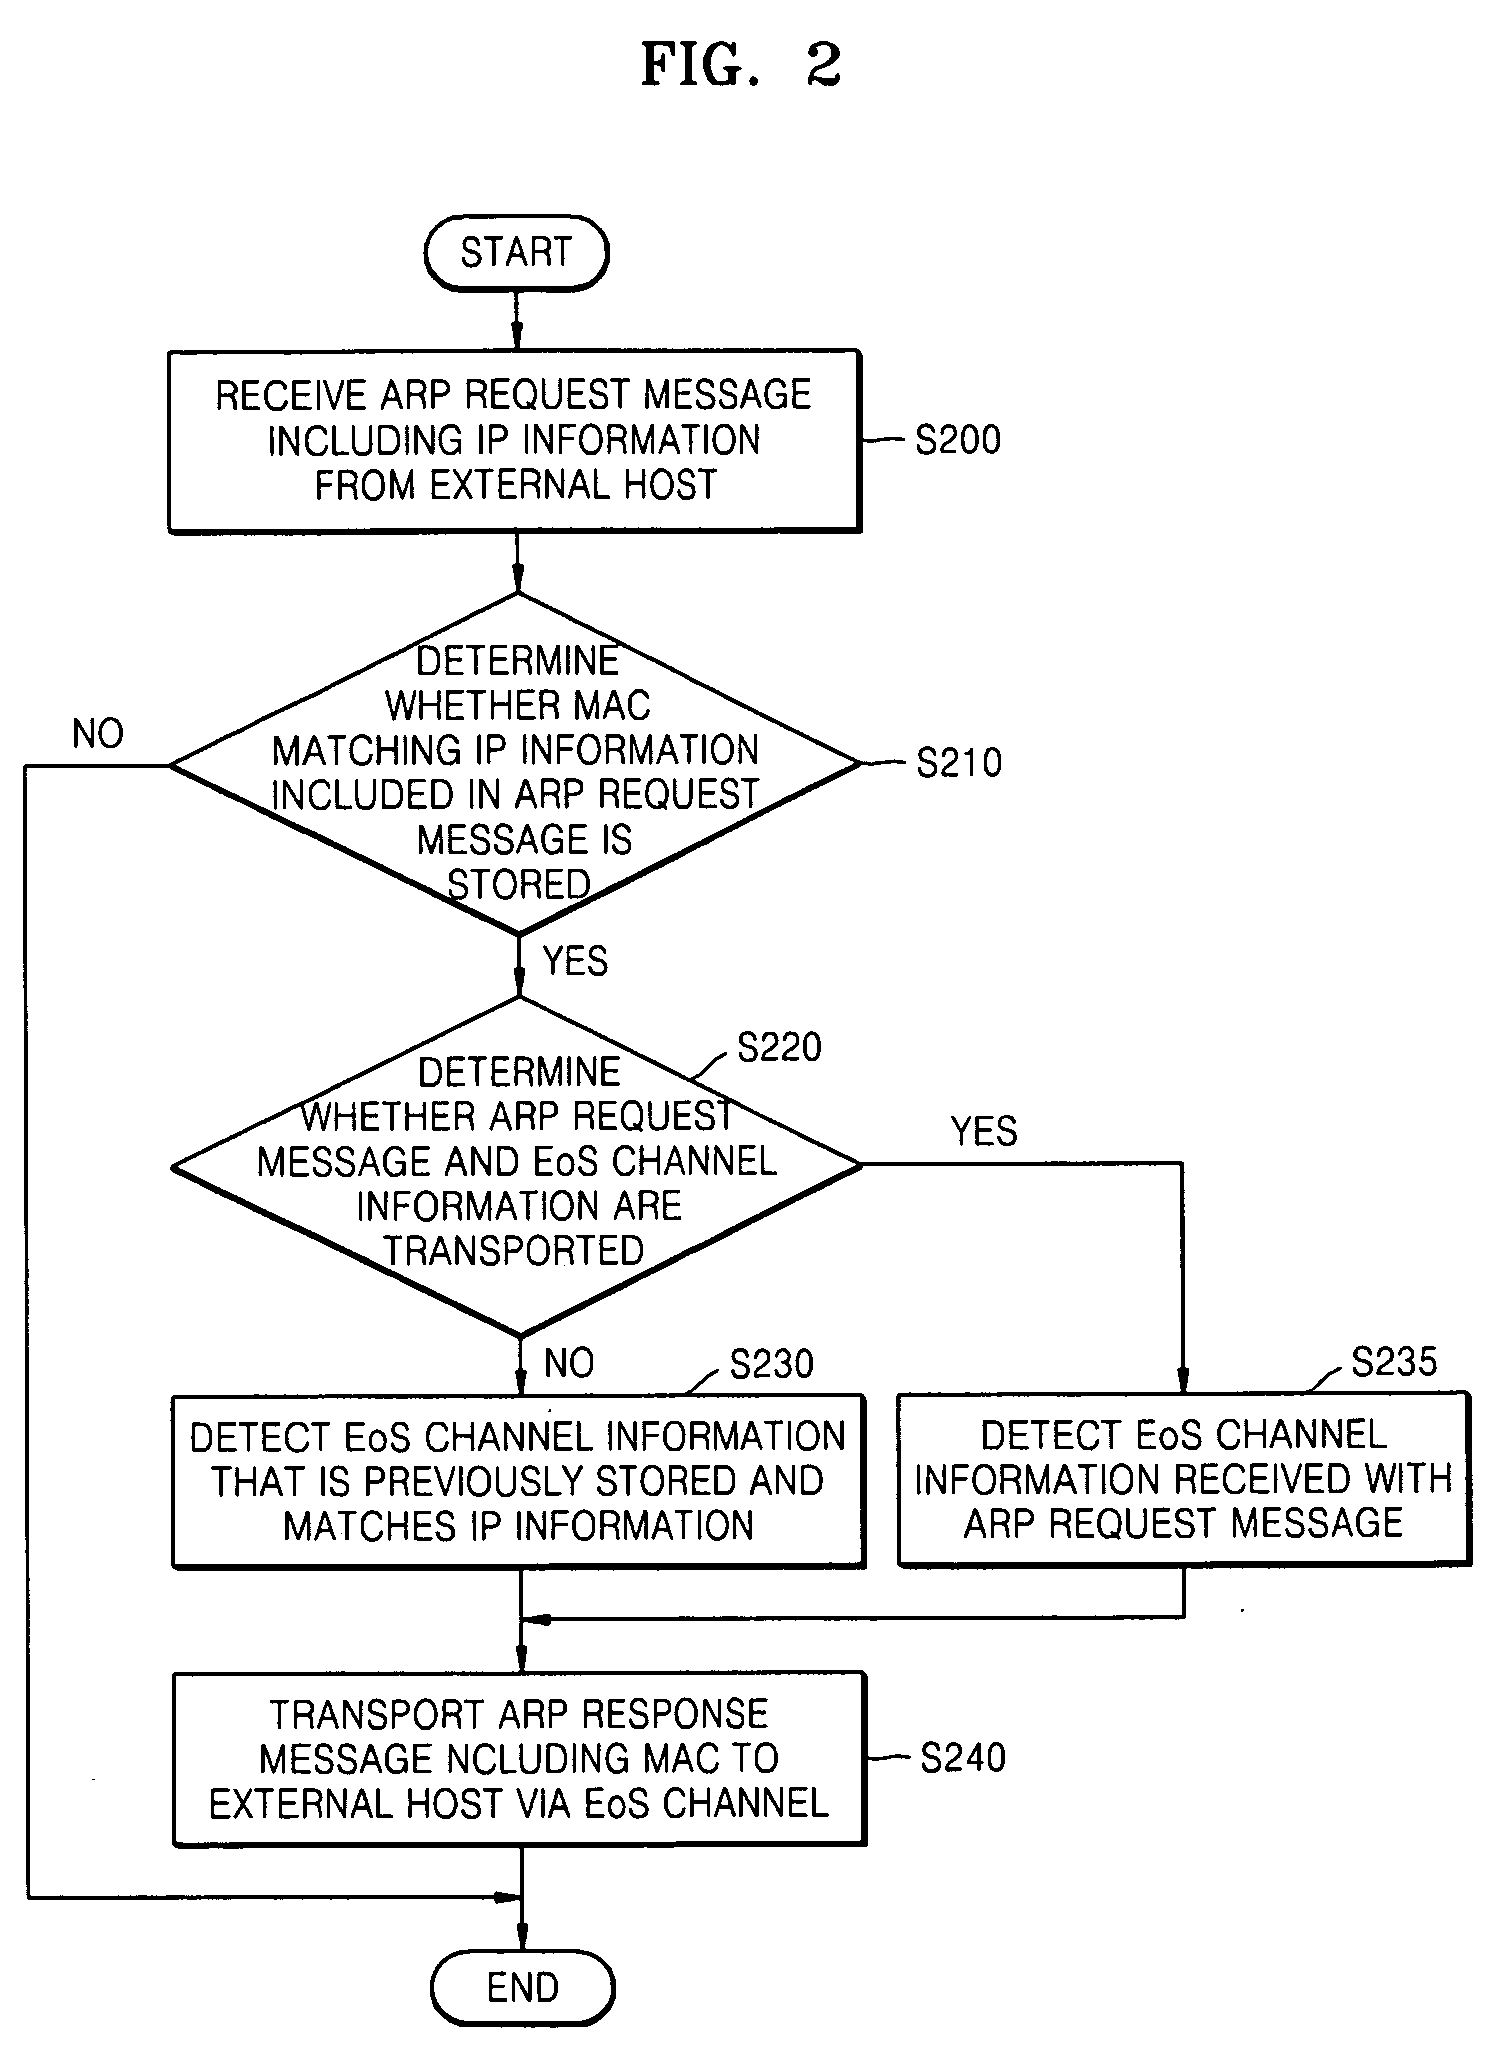 Address resolution protocol (ARP) processing method for Ethernet matching